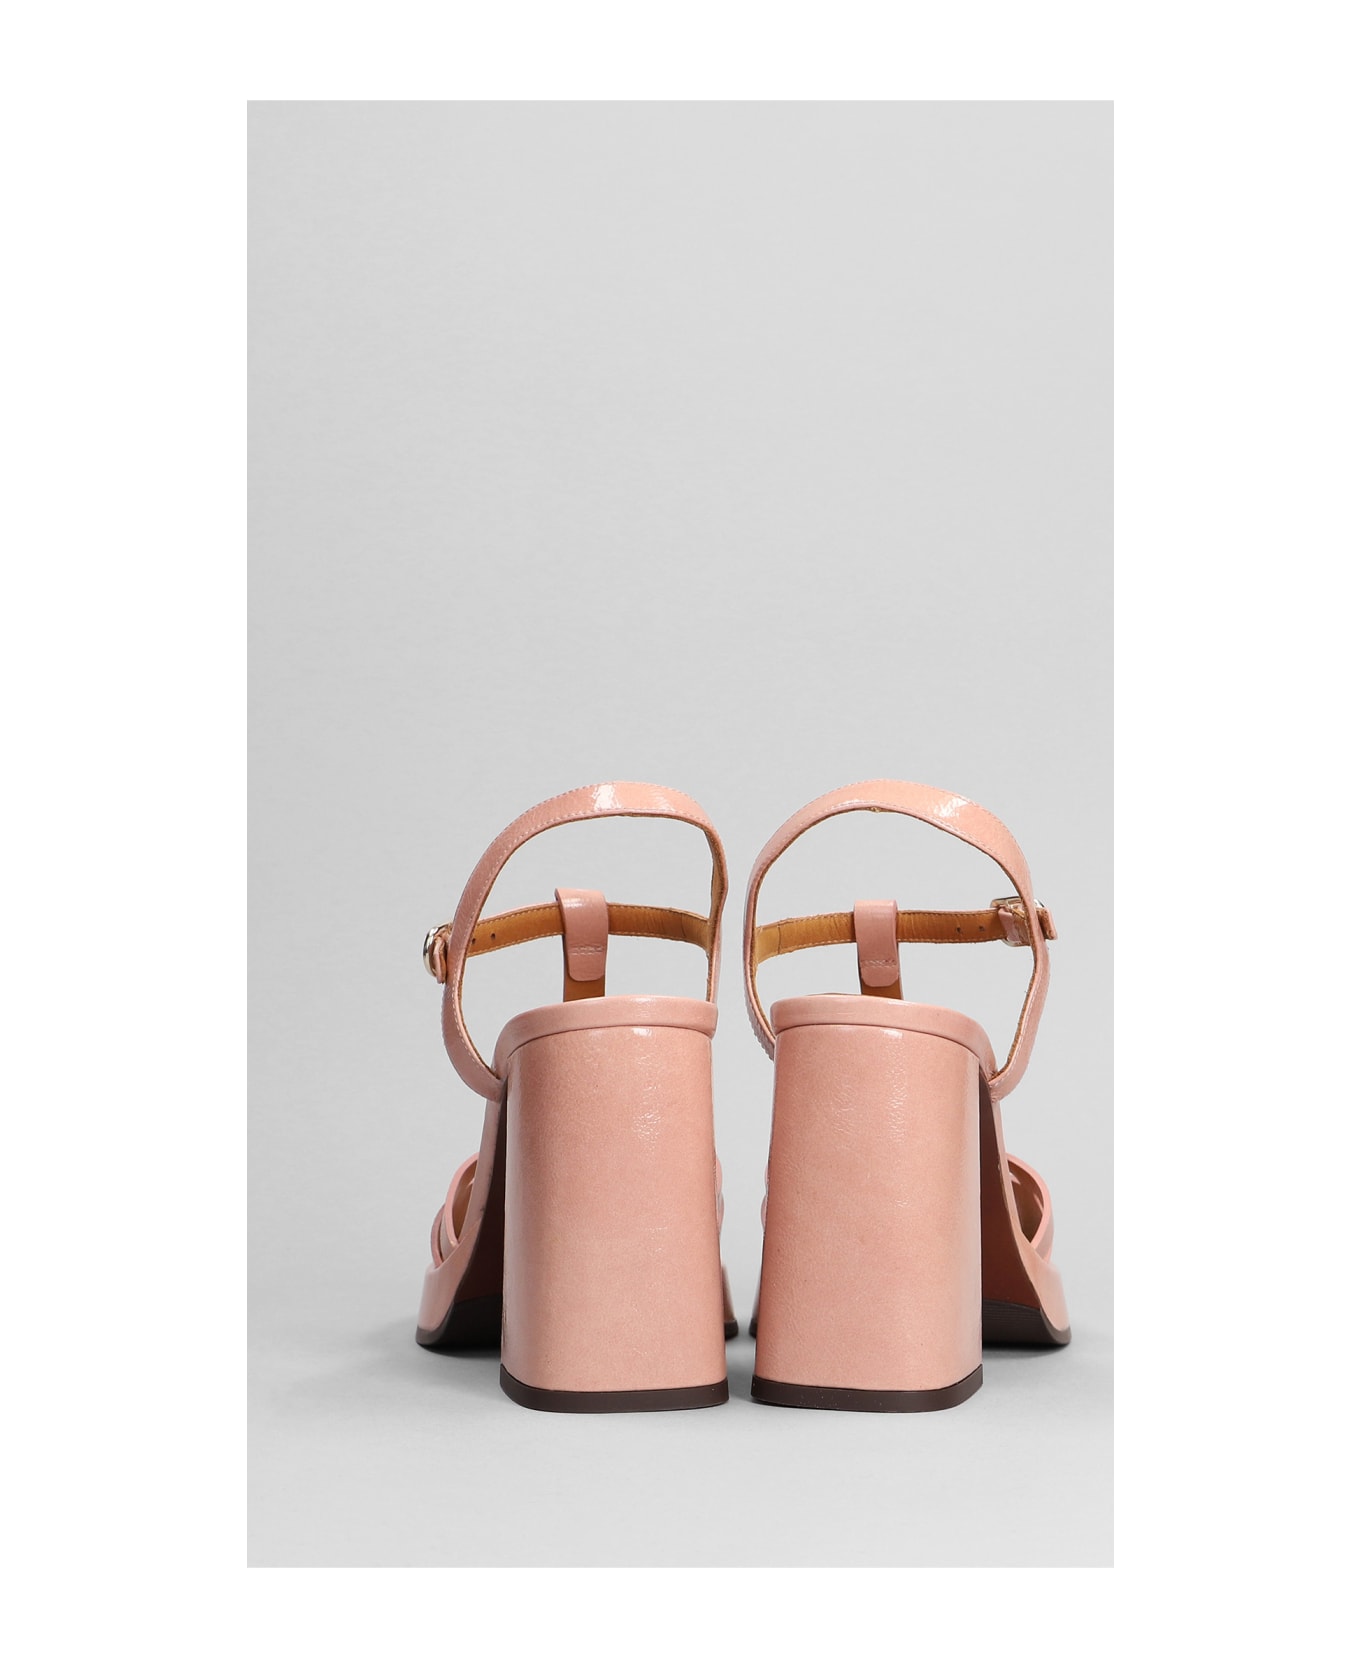 Chie Mihara Zinto Sandals In Rose-pink Leather - rose-pink